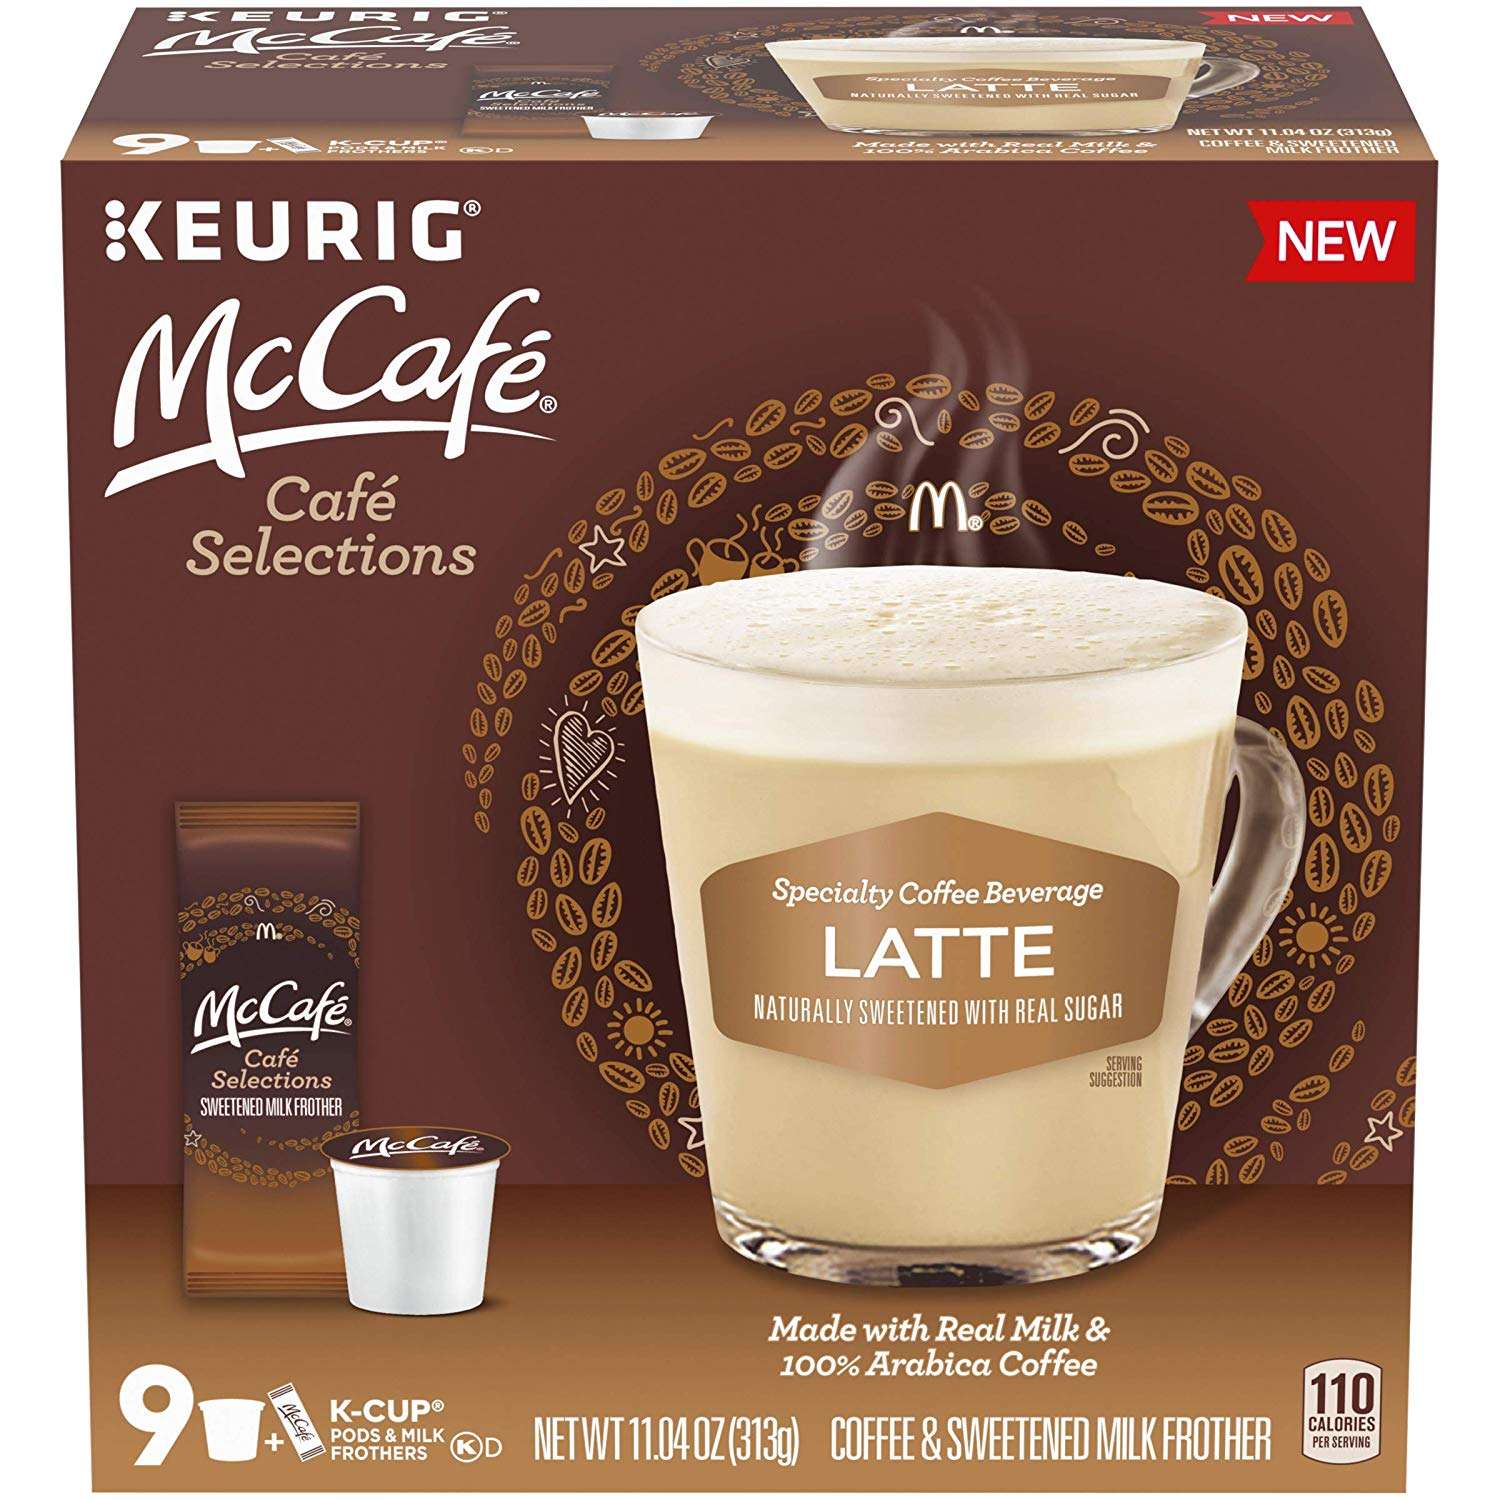 Save on your favorite K Cup pods and coffee brands